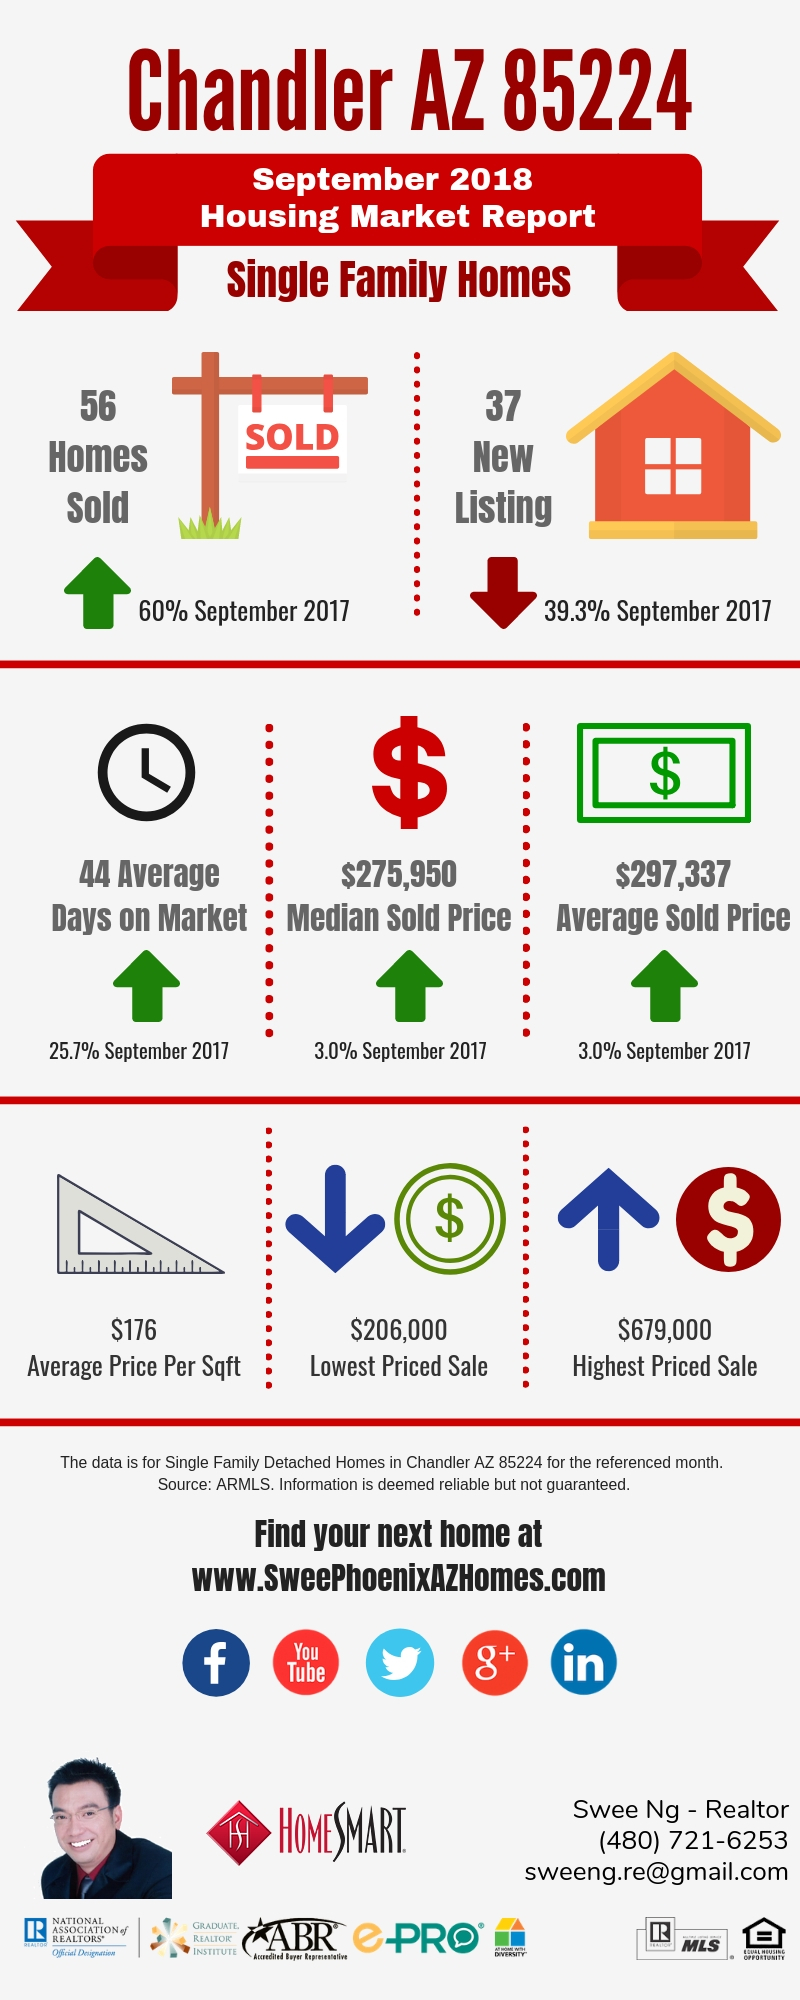 Chandler AZ 85224 Housing Market Trends Report September 2018, House Value, Real Estate and Statistic by Swee Ng